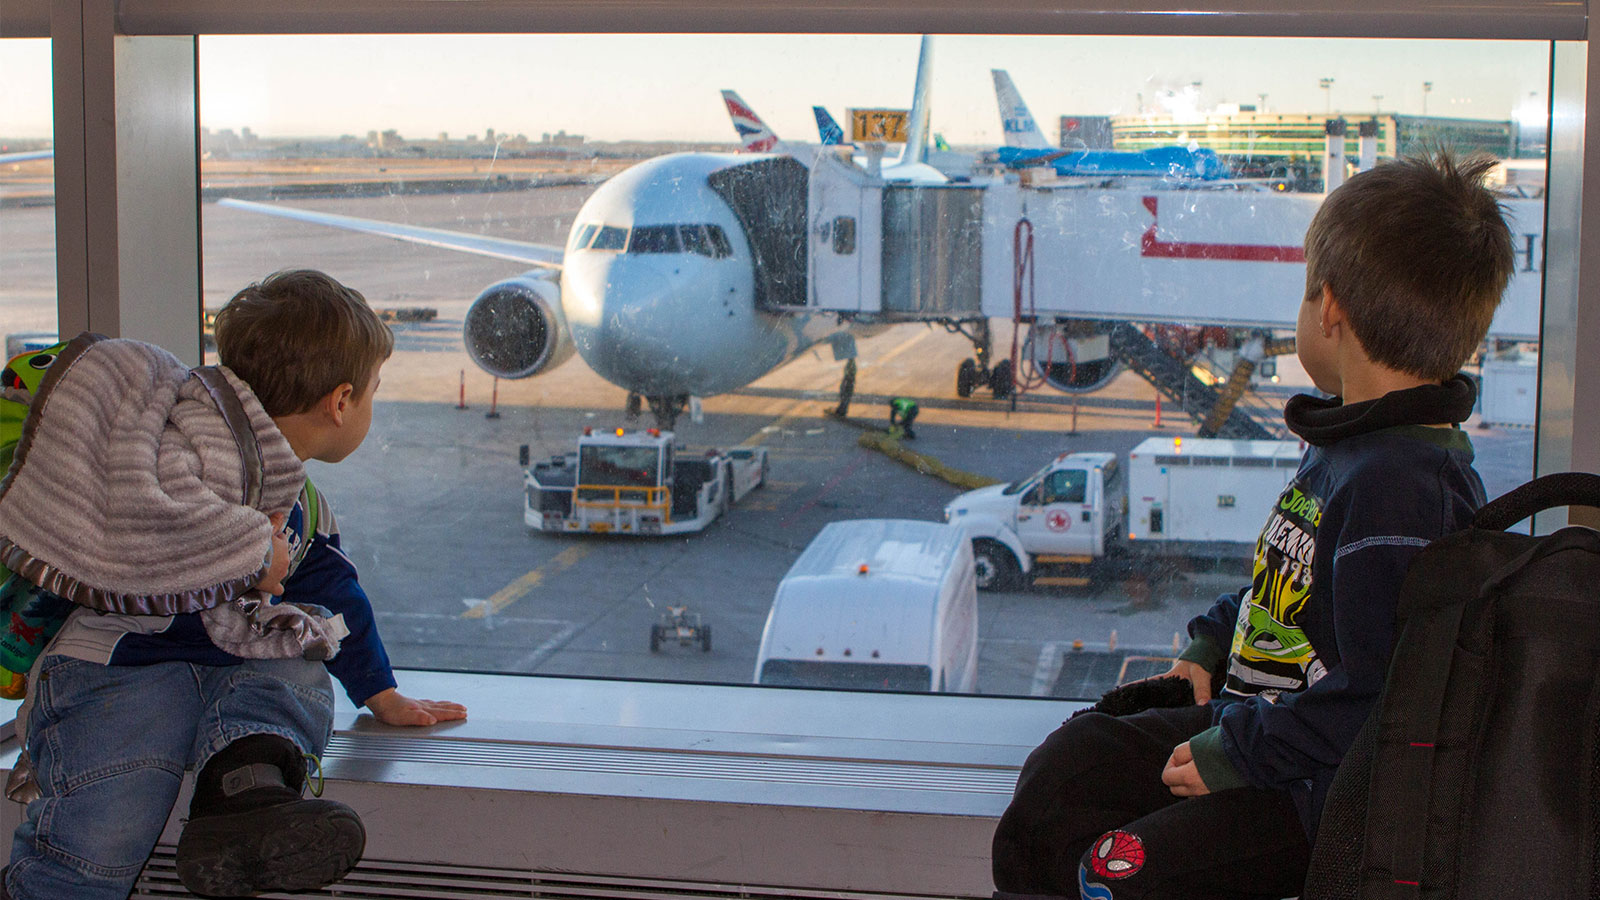 Two young boys watch planes out of an airport window - plan an international family vacation